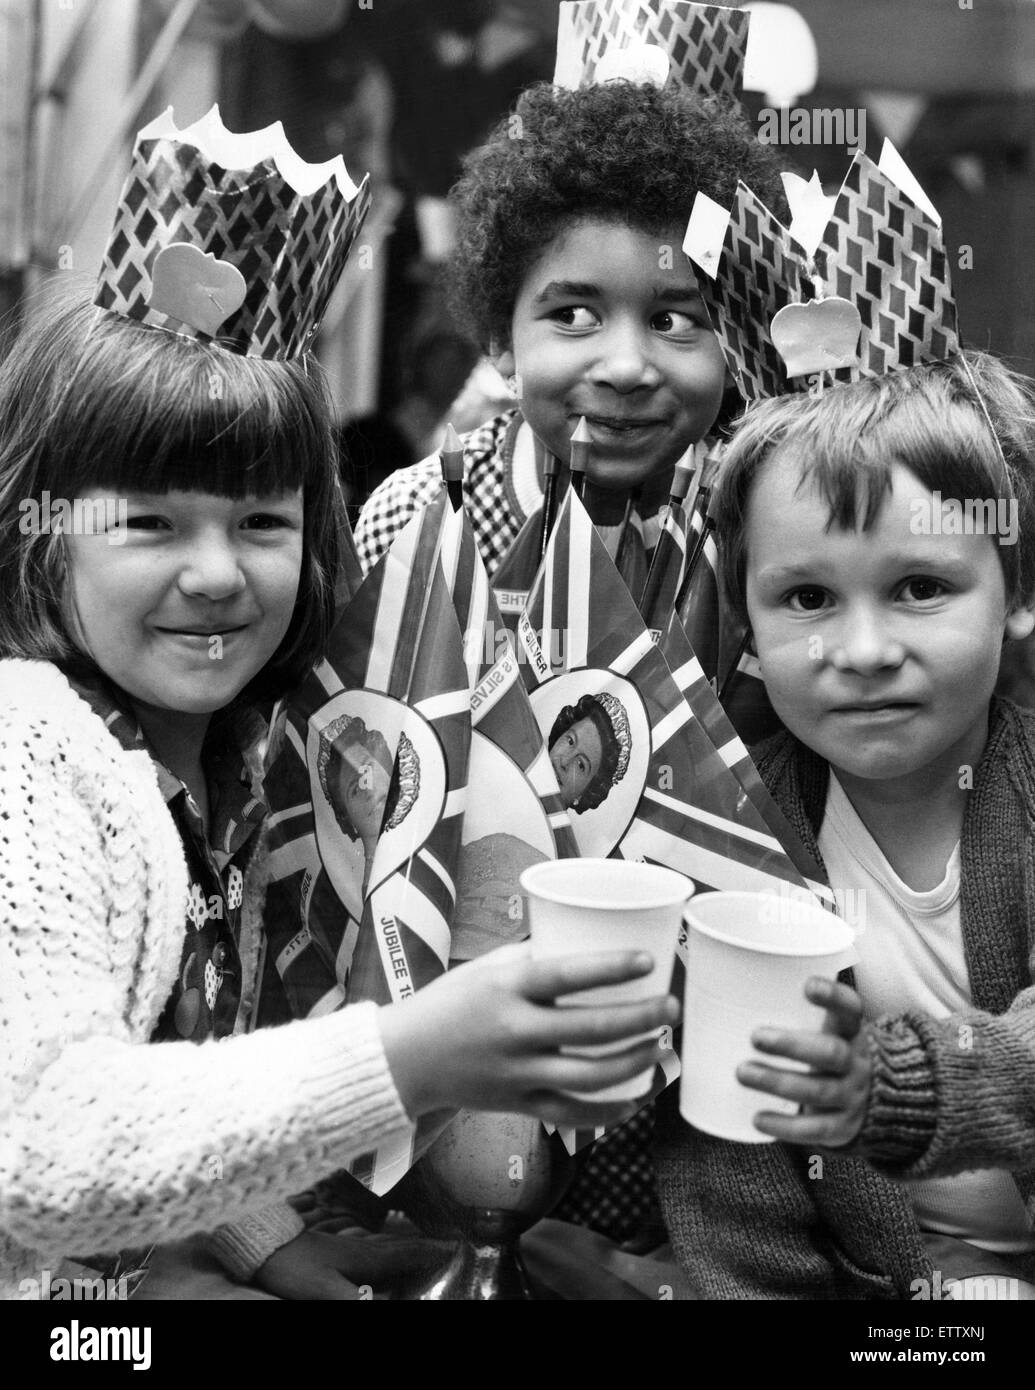 The Silver Jubilee of Elizabeth II marked the 25th anniversary of Queen Elizabeth II's accession to the throne. Showing the flag and toasting the Queen at The Nook street party, are three children who made the most of their Jubilee day. Left to right, Sar Stock Photo